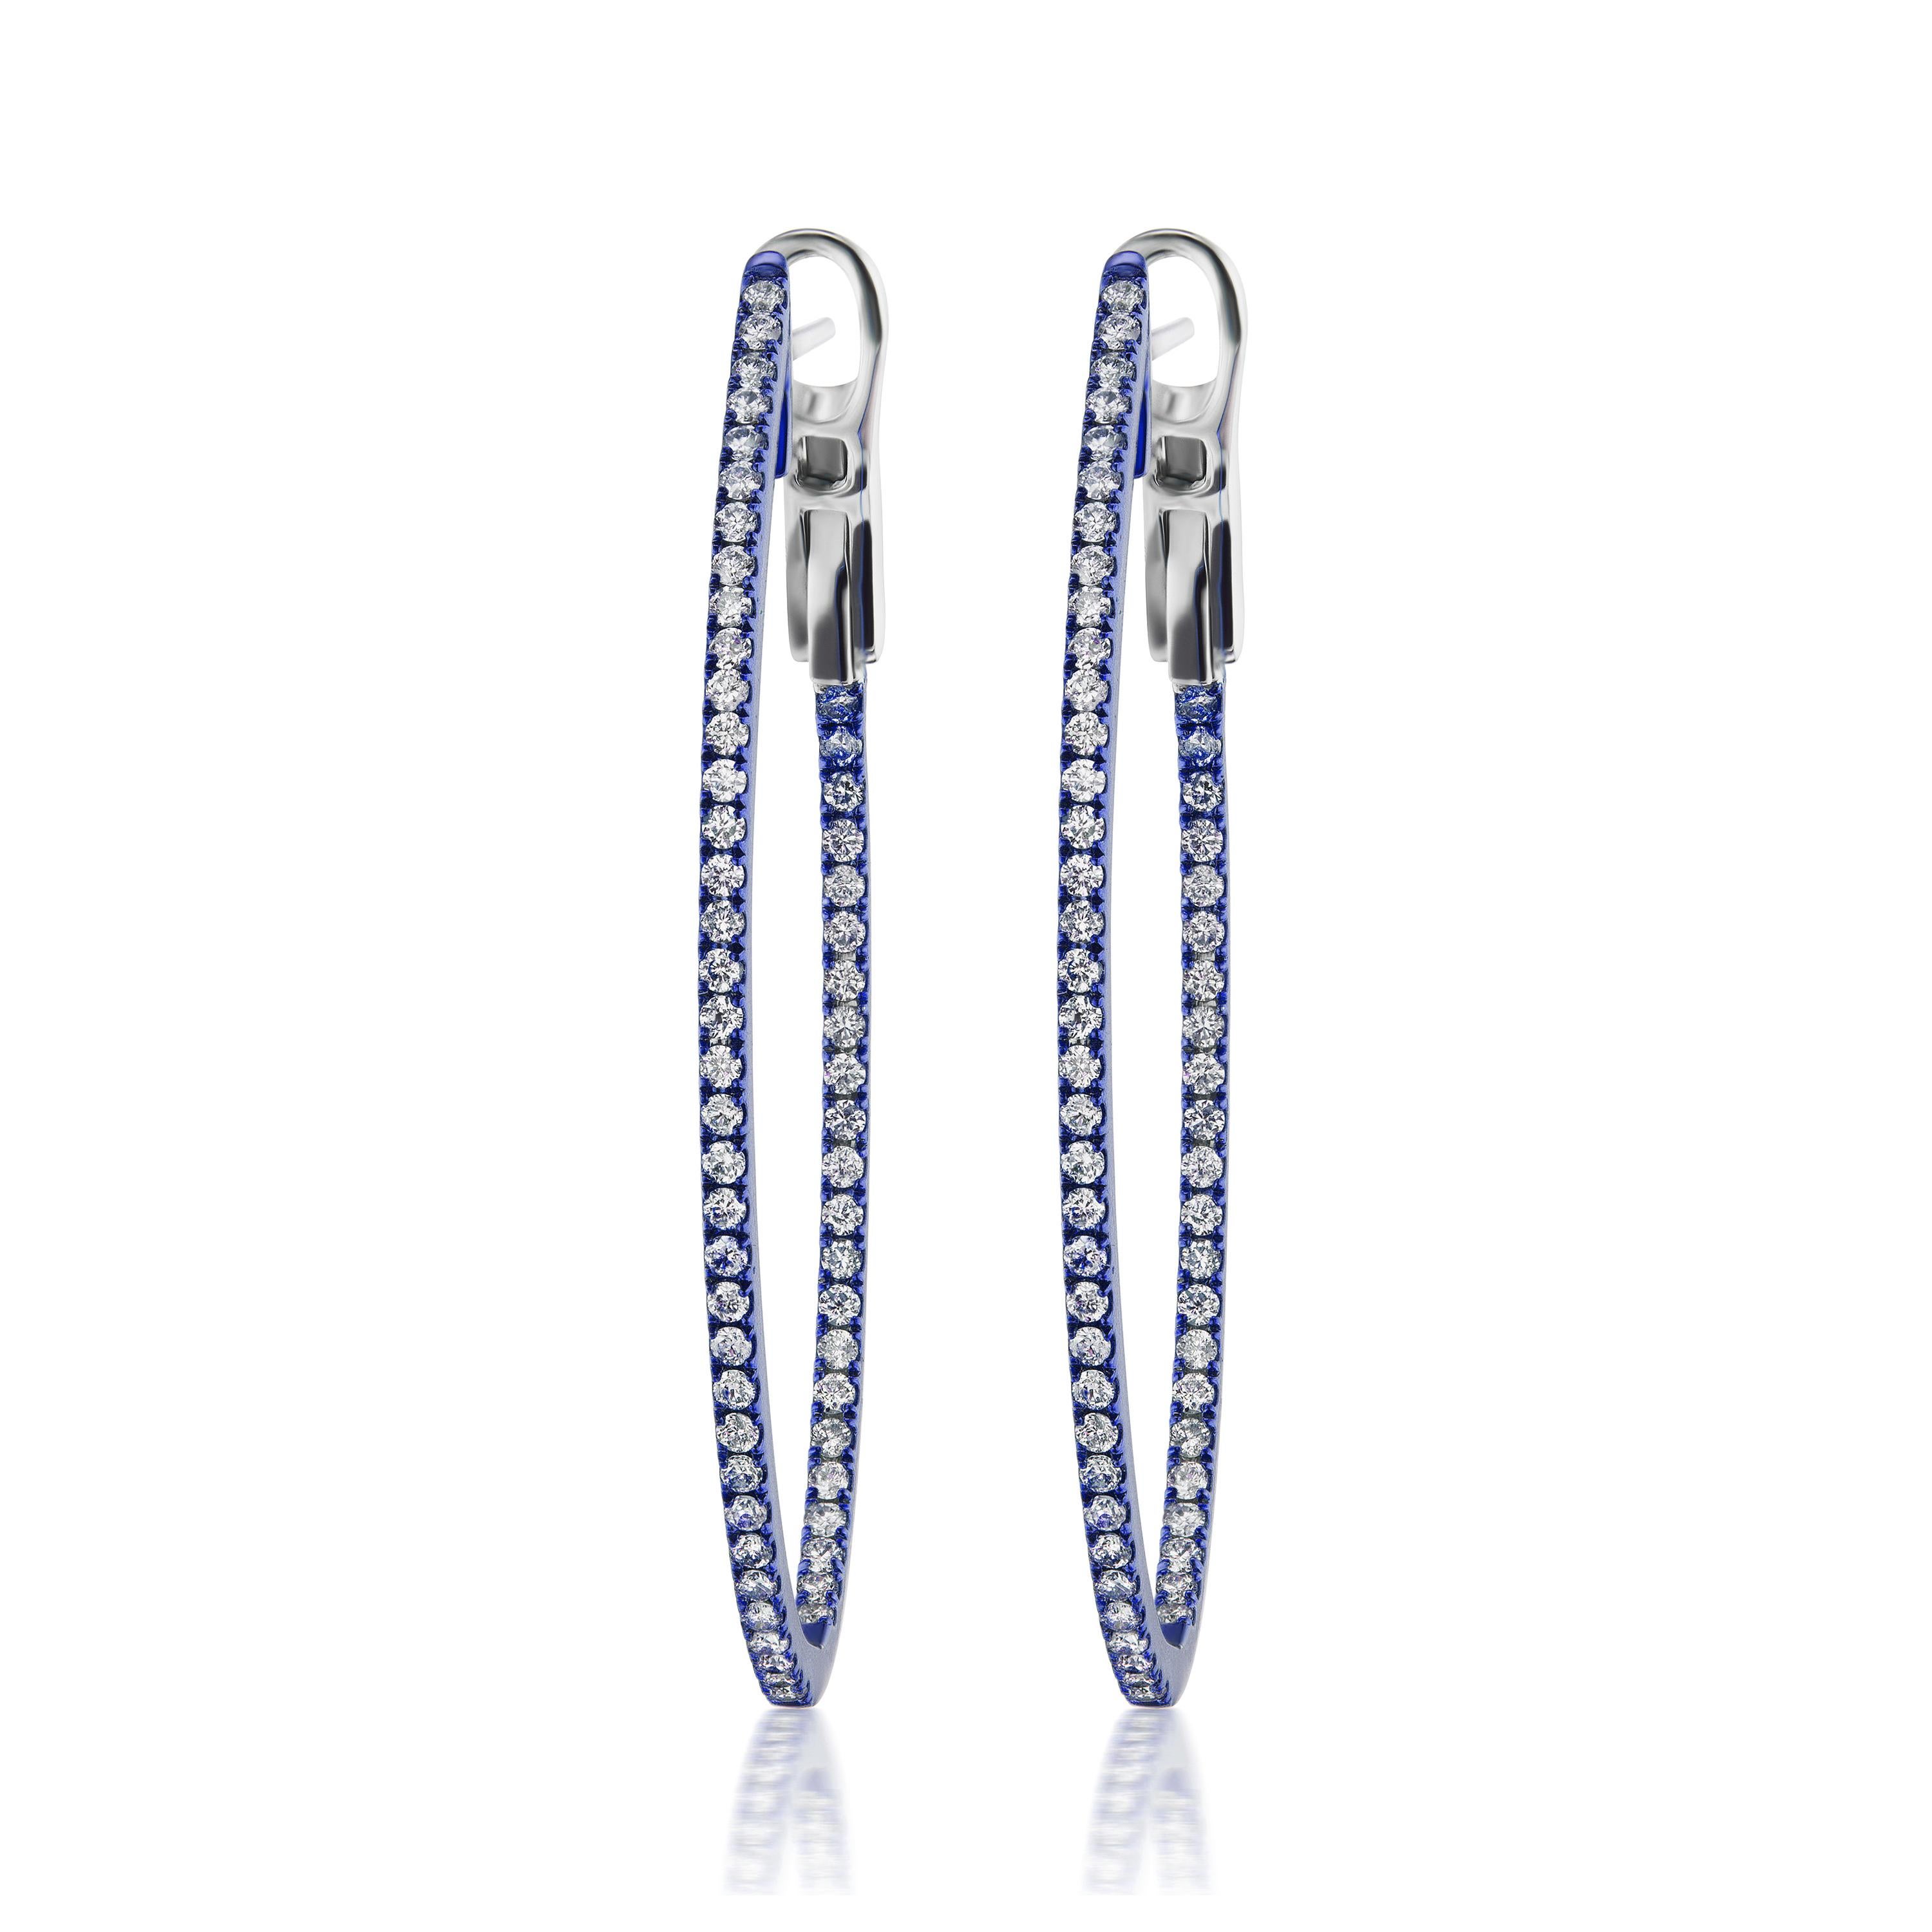 A dazzling pair of hoops featured with 116 pave round diamonds embellished inside and outside. Crafted by Luxle in 18K White gold. The diamonds are I1 in clarity and GH in color, weighing 0.77 Cts. these hoops come with omega backs. The blue rhodium